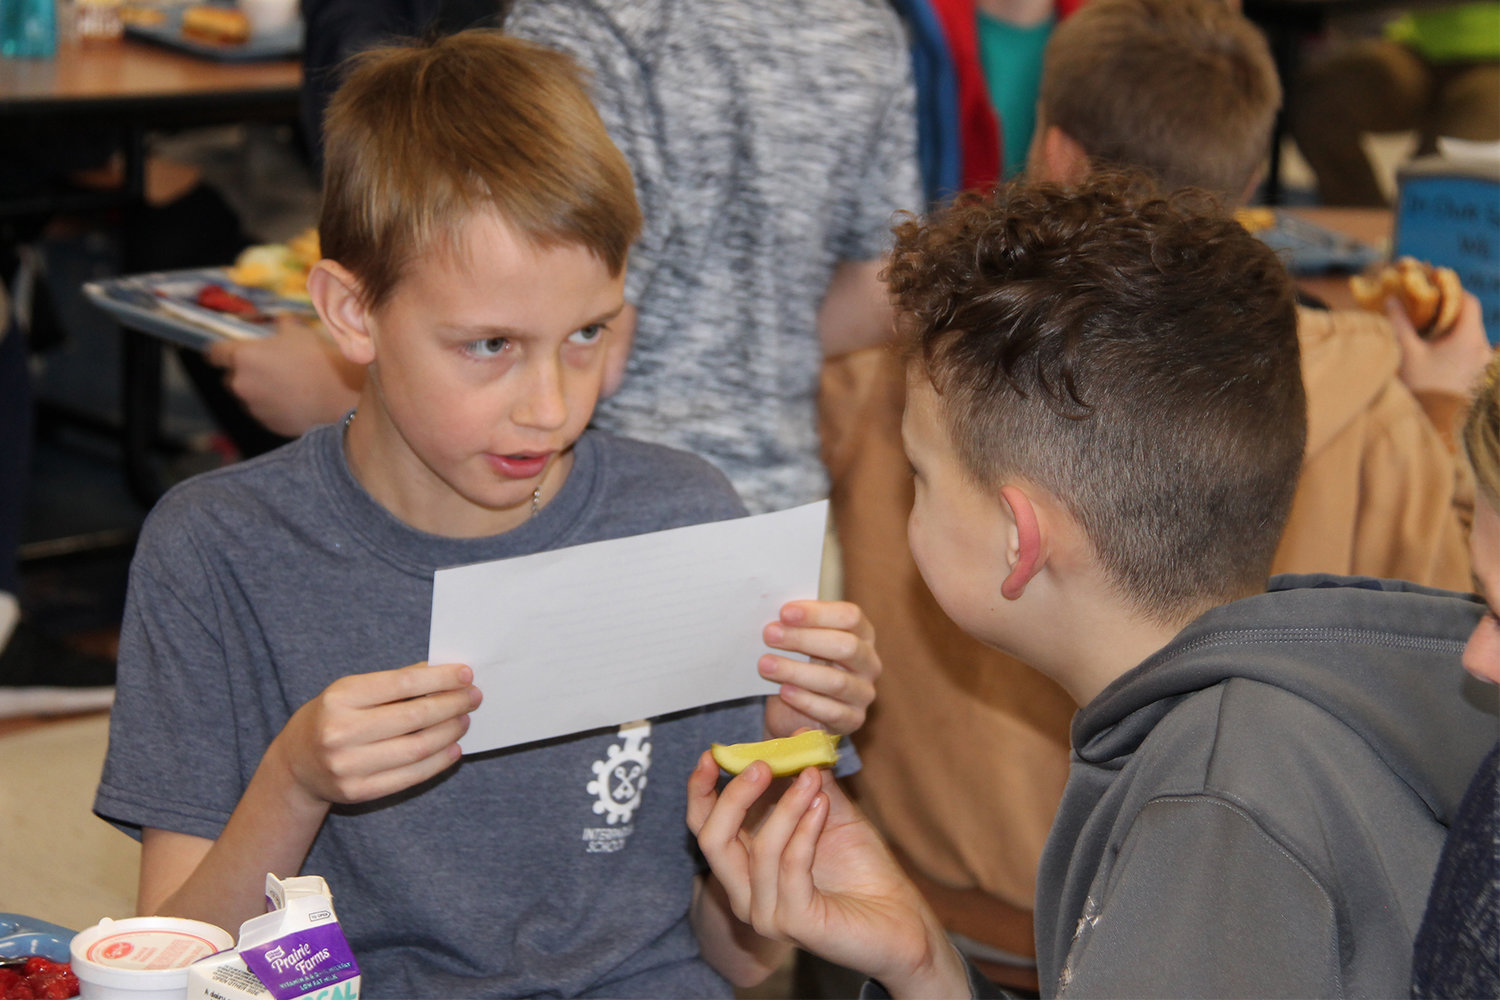 Students get serious about the ice-breaker questions at their tables.